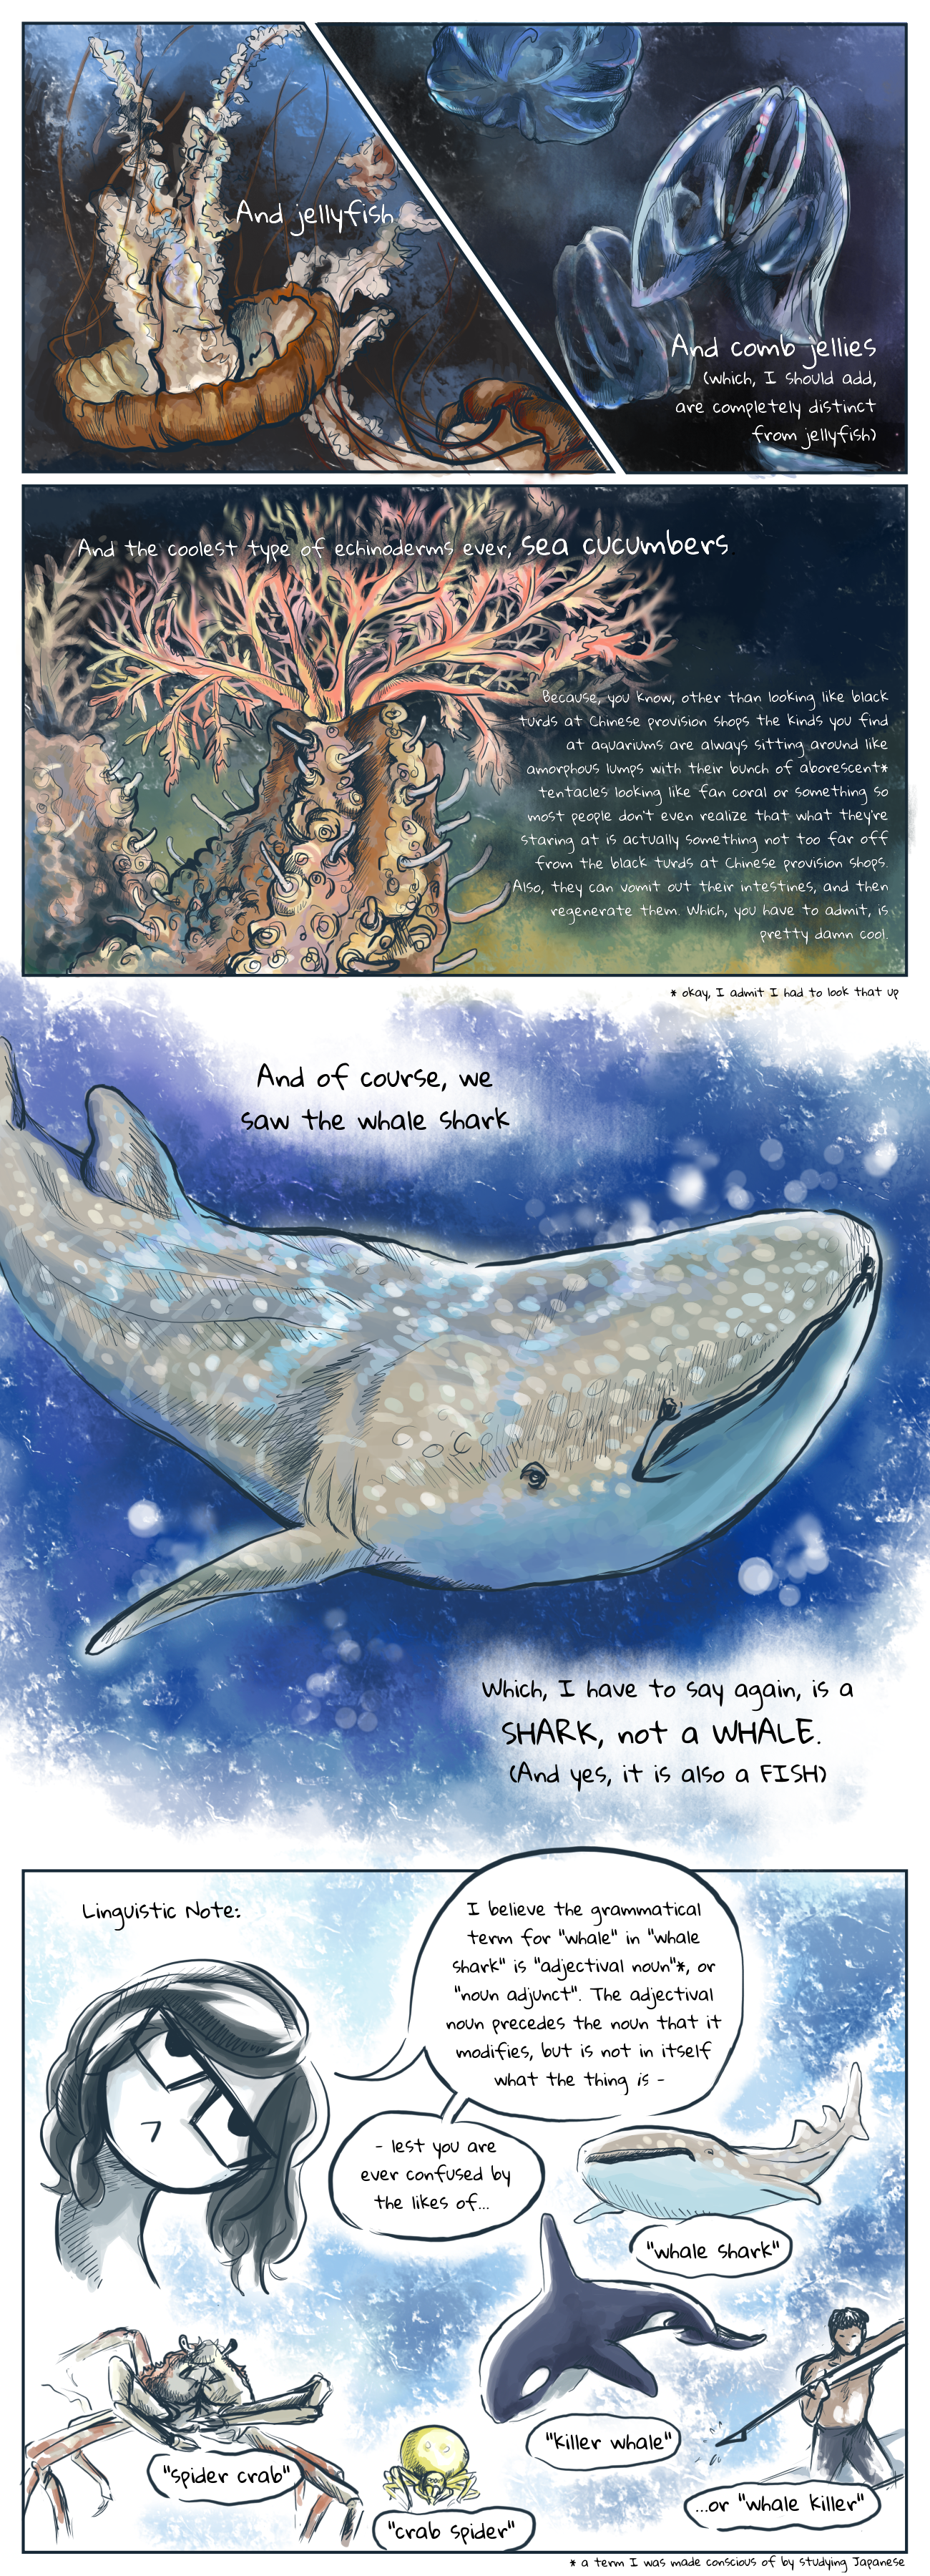 Page 2 of the 'Osaka Kaiyukan' episode of my webcomic, 'I Went to Japan', showing the various animals we see in the aquarium, including the famous whale shark